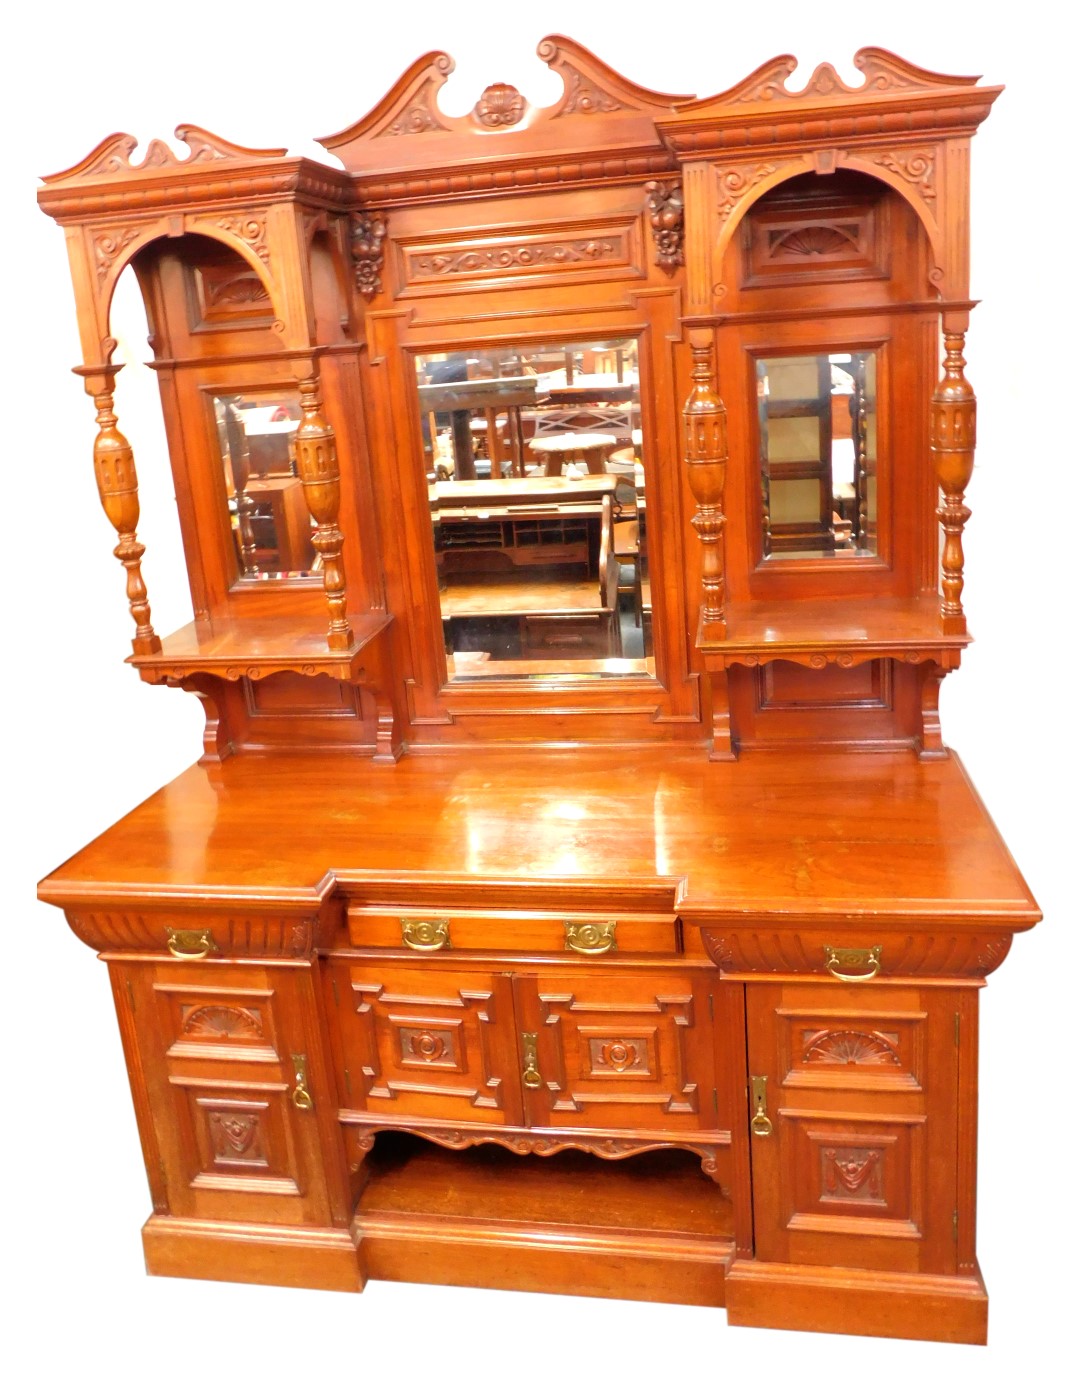 A late Victorian mahogany breakfront sideboard, the triple break arch pediments with foliate carving